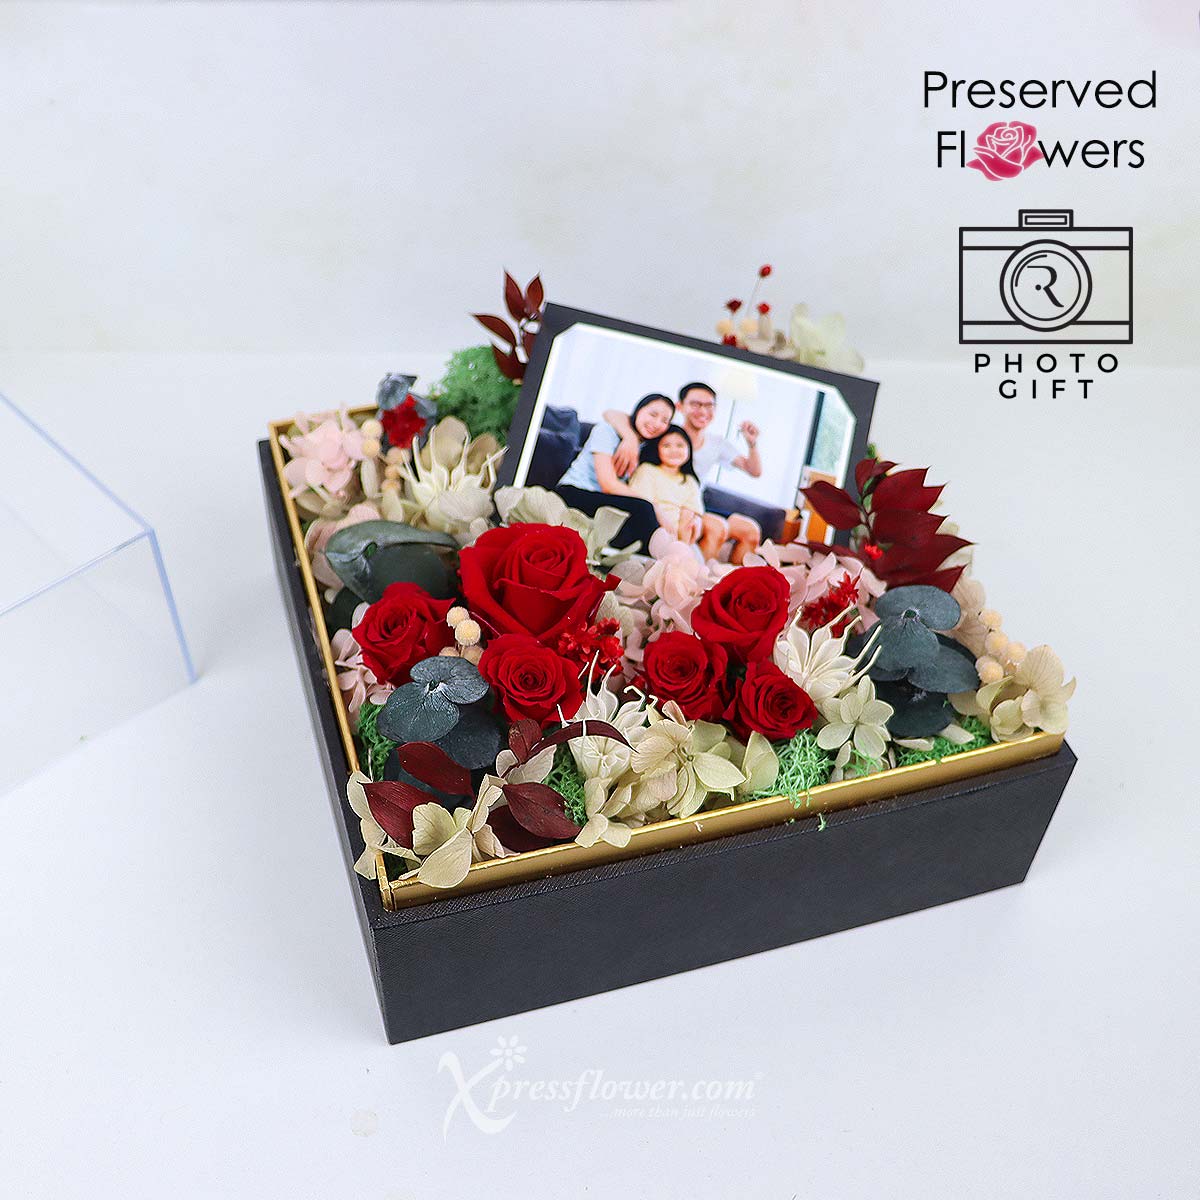 PR2131 Magical Petals (Preserved Flowers with Personalised Photo and LED Lights) 1d